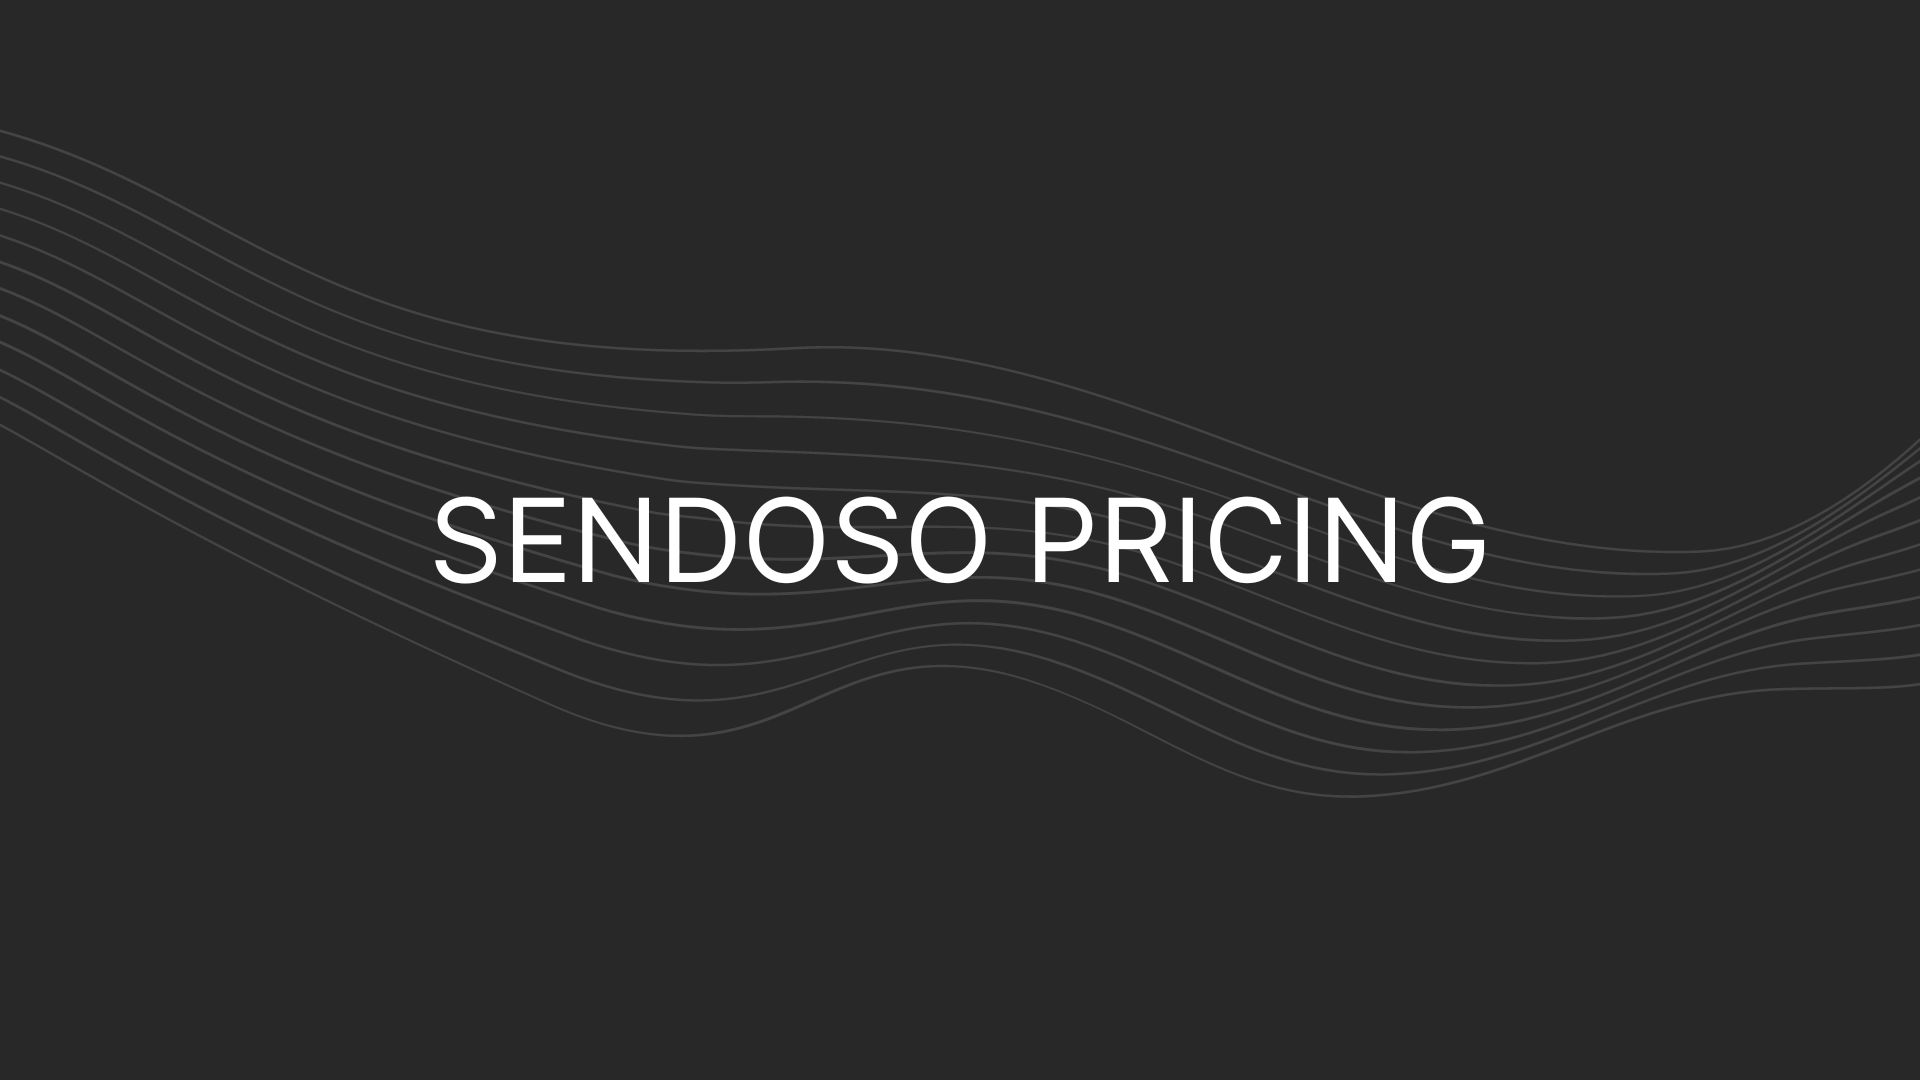 Sendoso Pricing – Actual Prices for All Packages